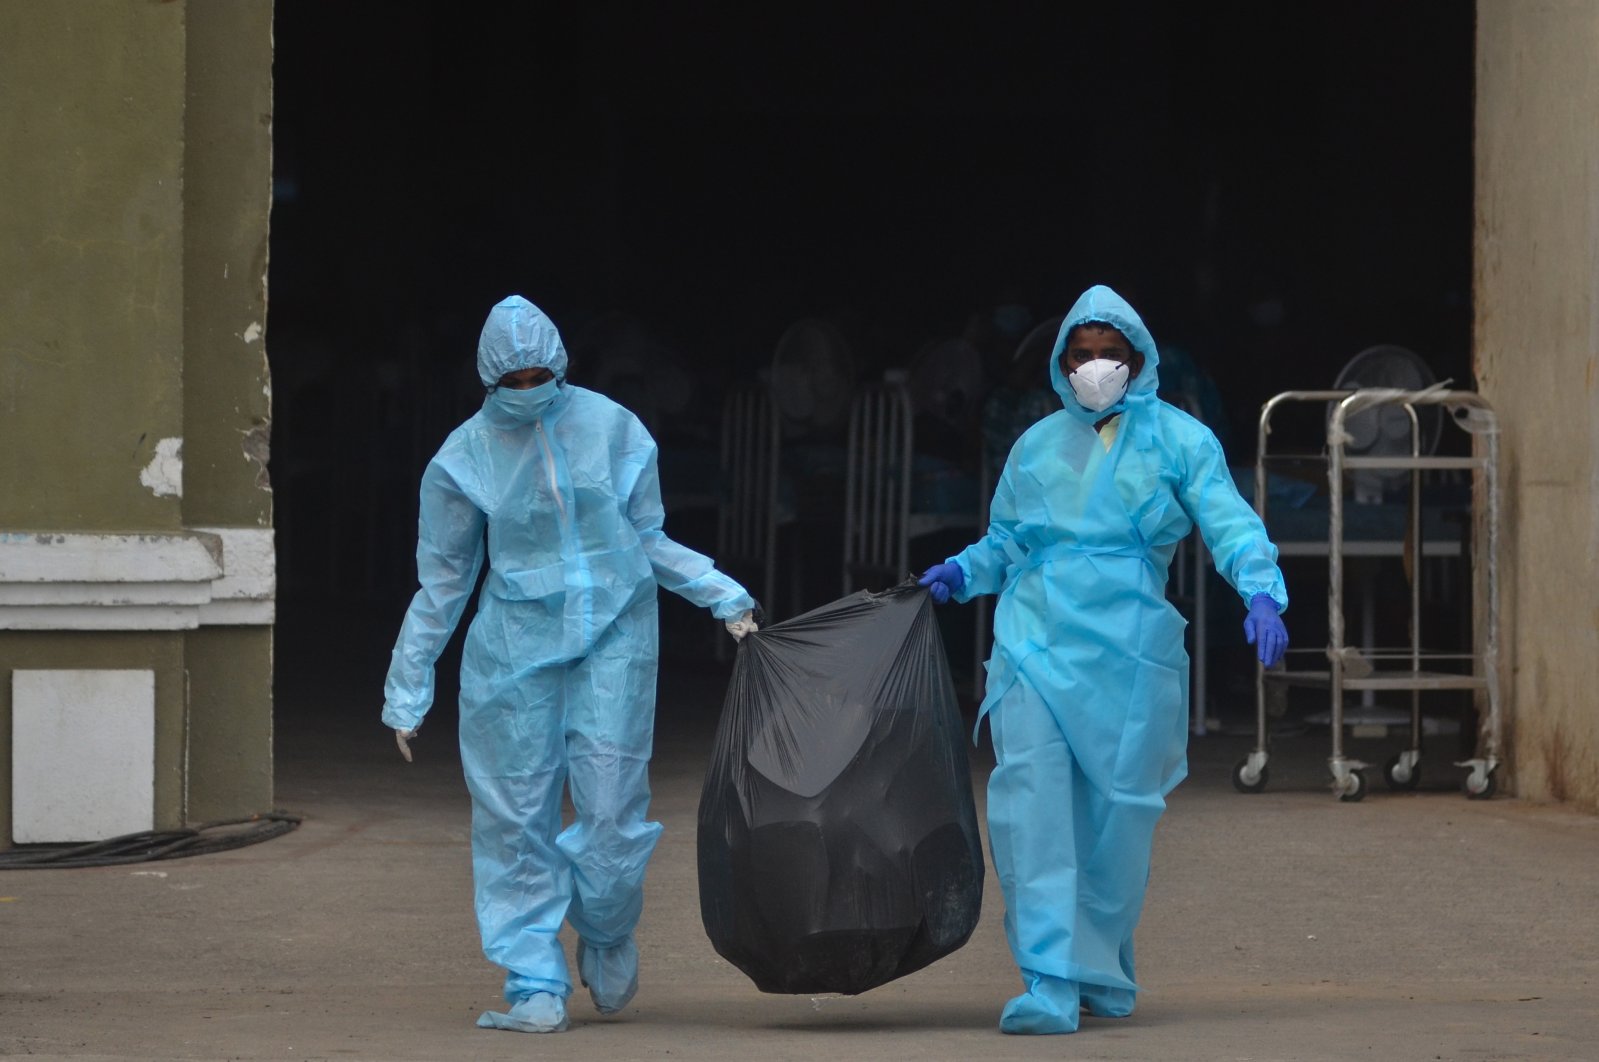  Indian health workers carry the medical waste for disposal at the Chennai Trade Centre (CTC) which is converted into a makeshift COVID-19 care facility for coronavirus patients, Chennai, India, Jan. 16, 2022. (EPA Photo) 